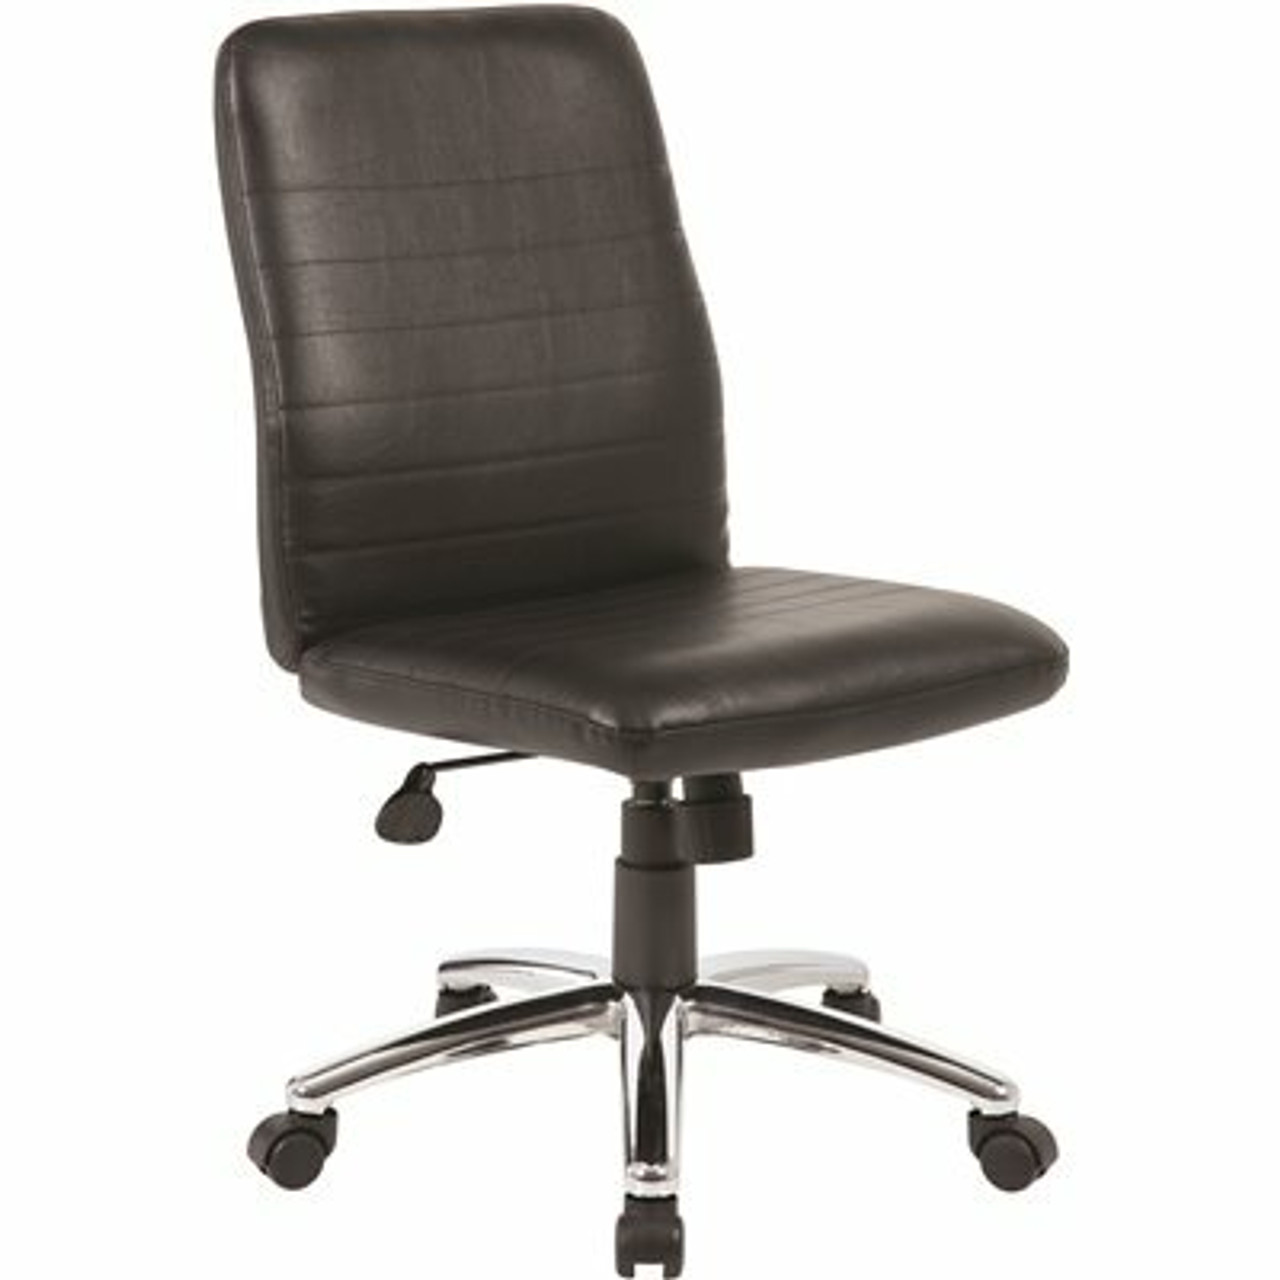 Boss Office Products Black Vinyl Ribbed Style Cushions Chrome Base Armless Pneumatic Lift High Back Desk Chair